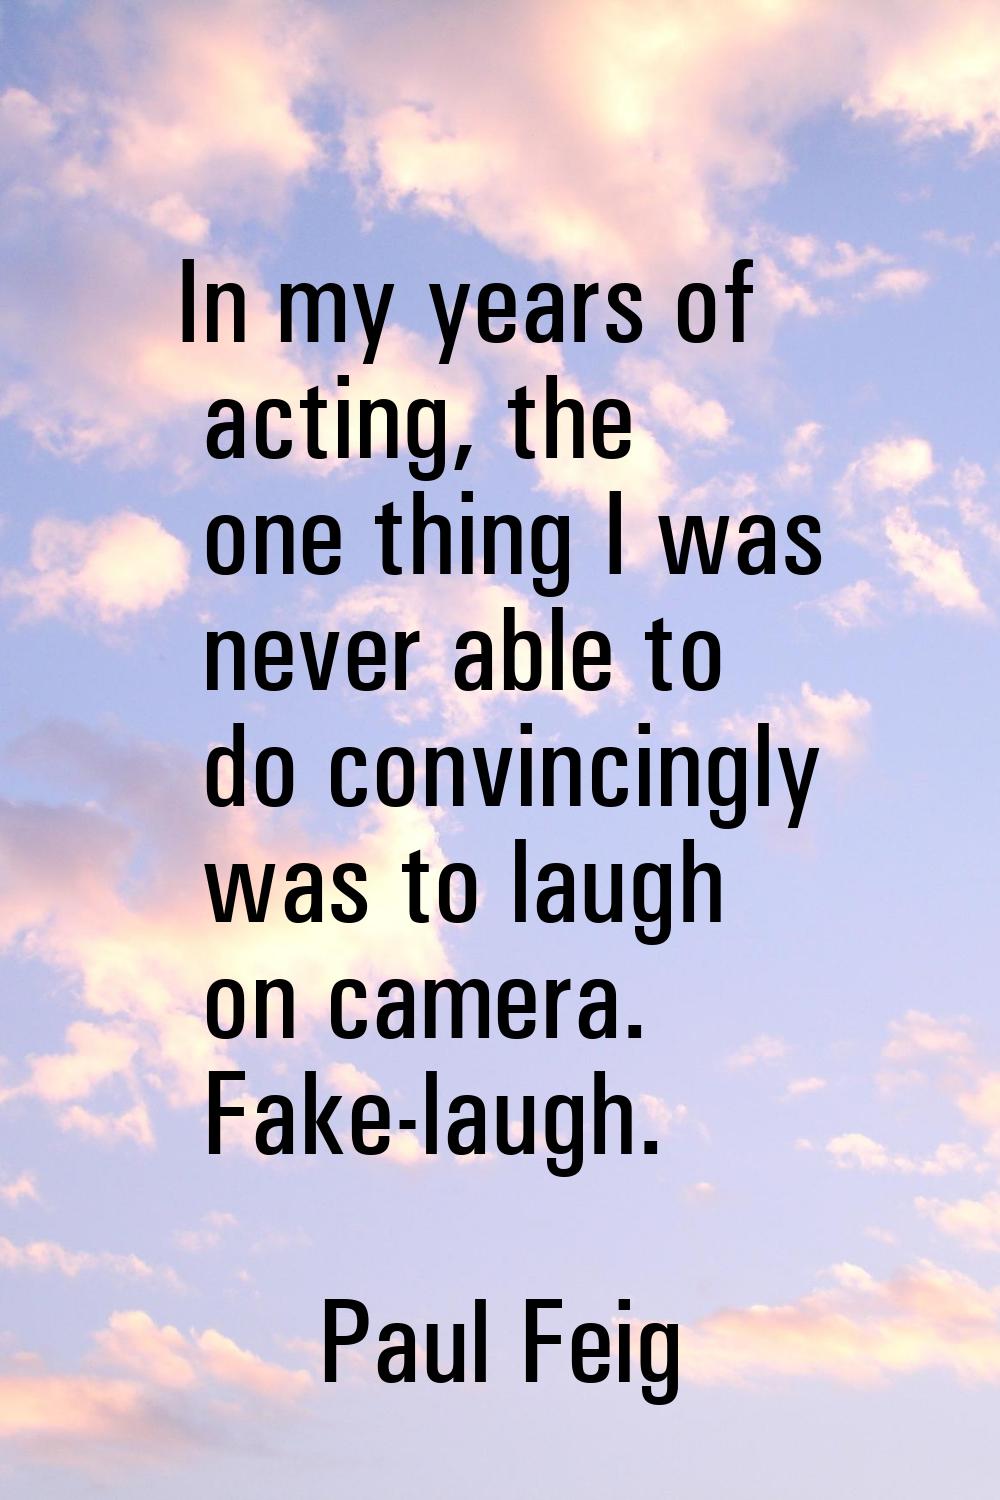 In my years of acting, the one thing I was never able to do convincingly was to laugh on camera. Fa